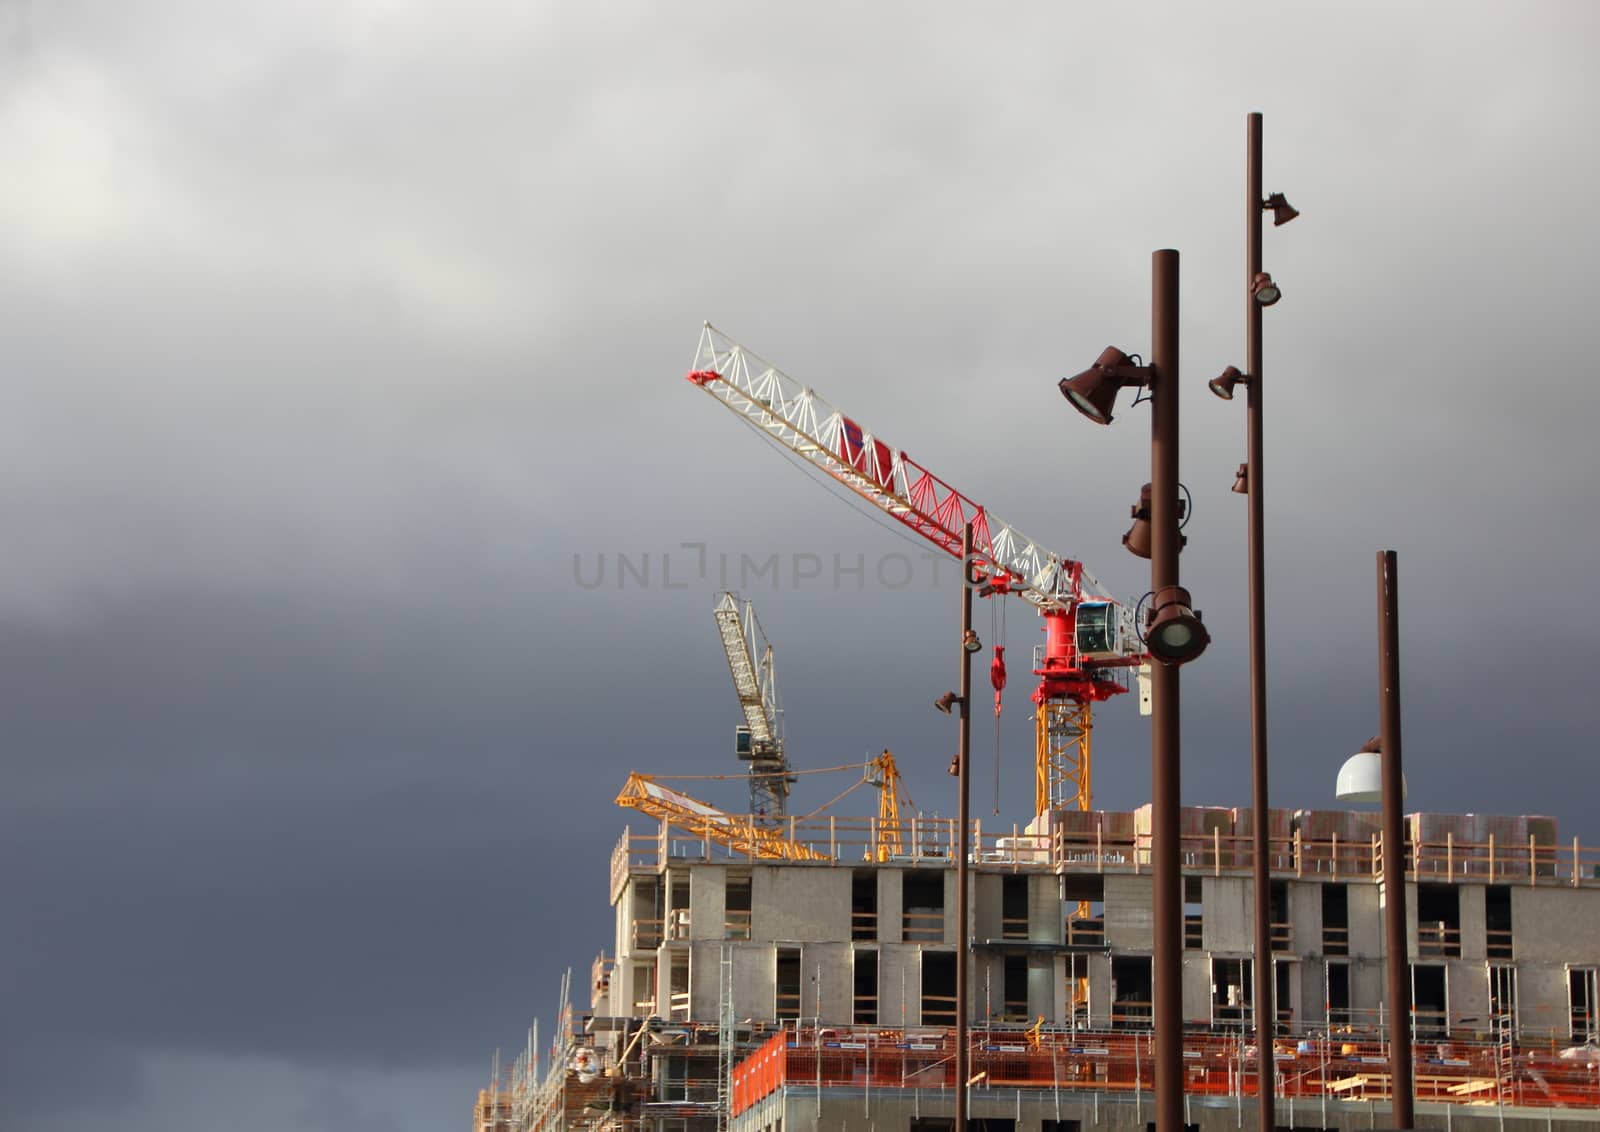 Building Site Cranes and Street Lamps with Dark Clouds